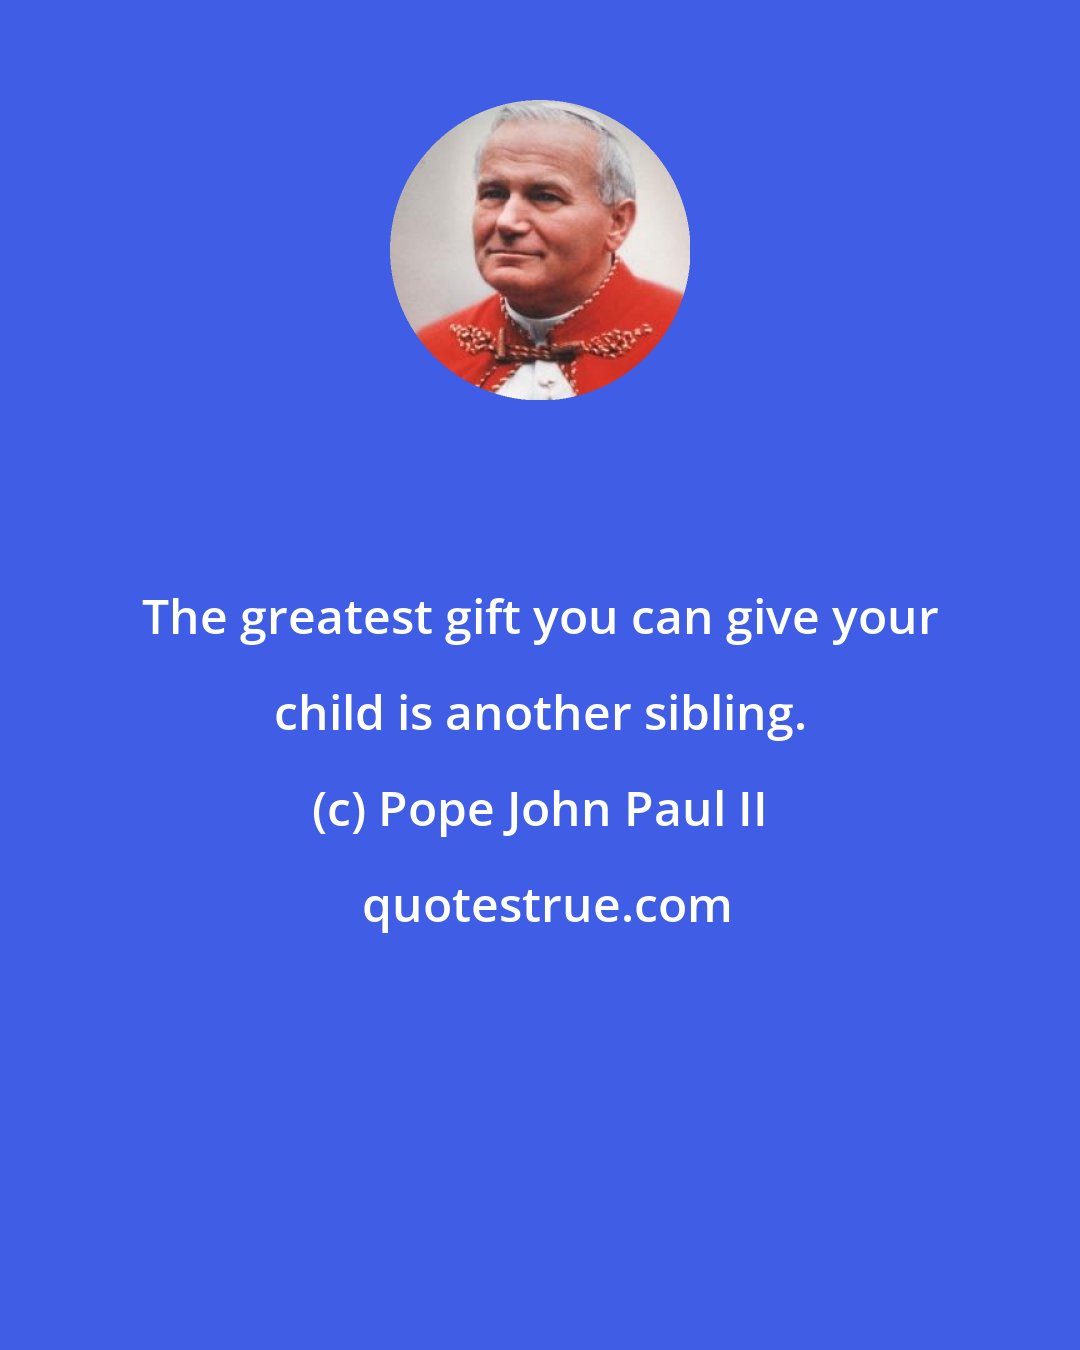 Pope John Paul II: The greatest gift you can give your child is another sibling.